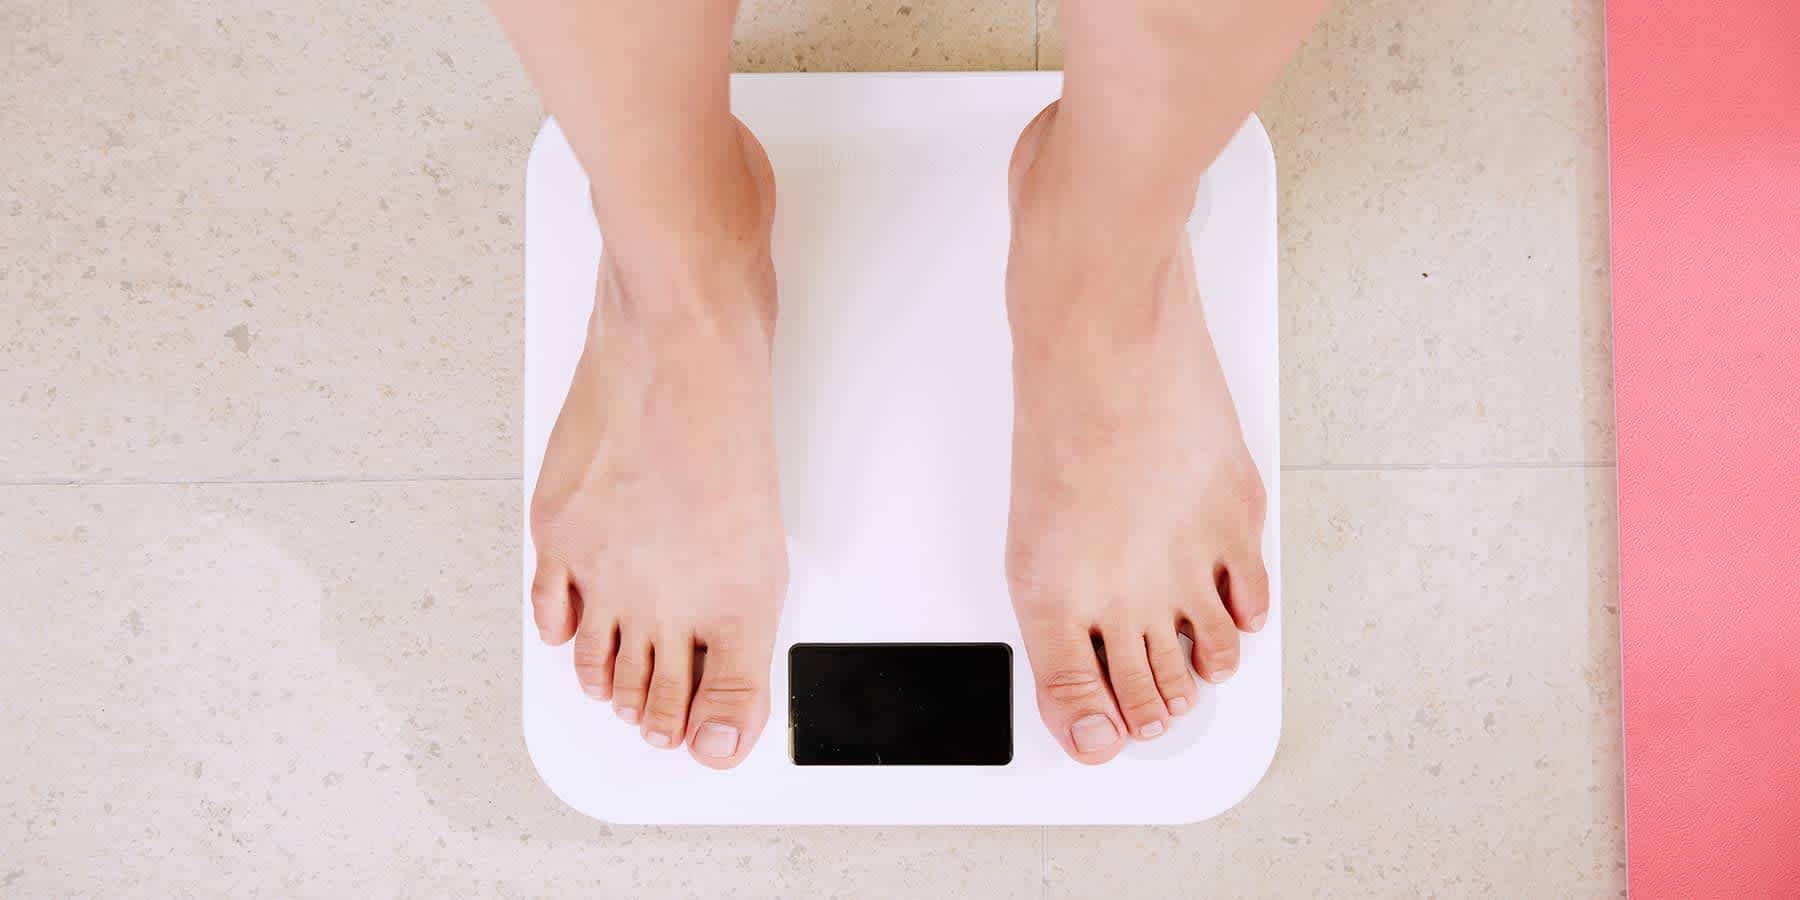 Person standing on a scale experiencing a weight loss plateau